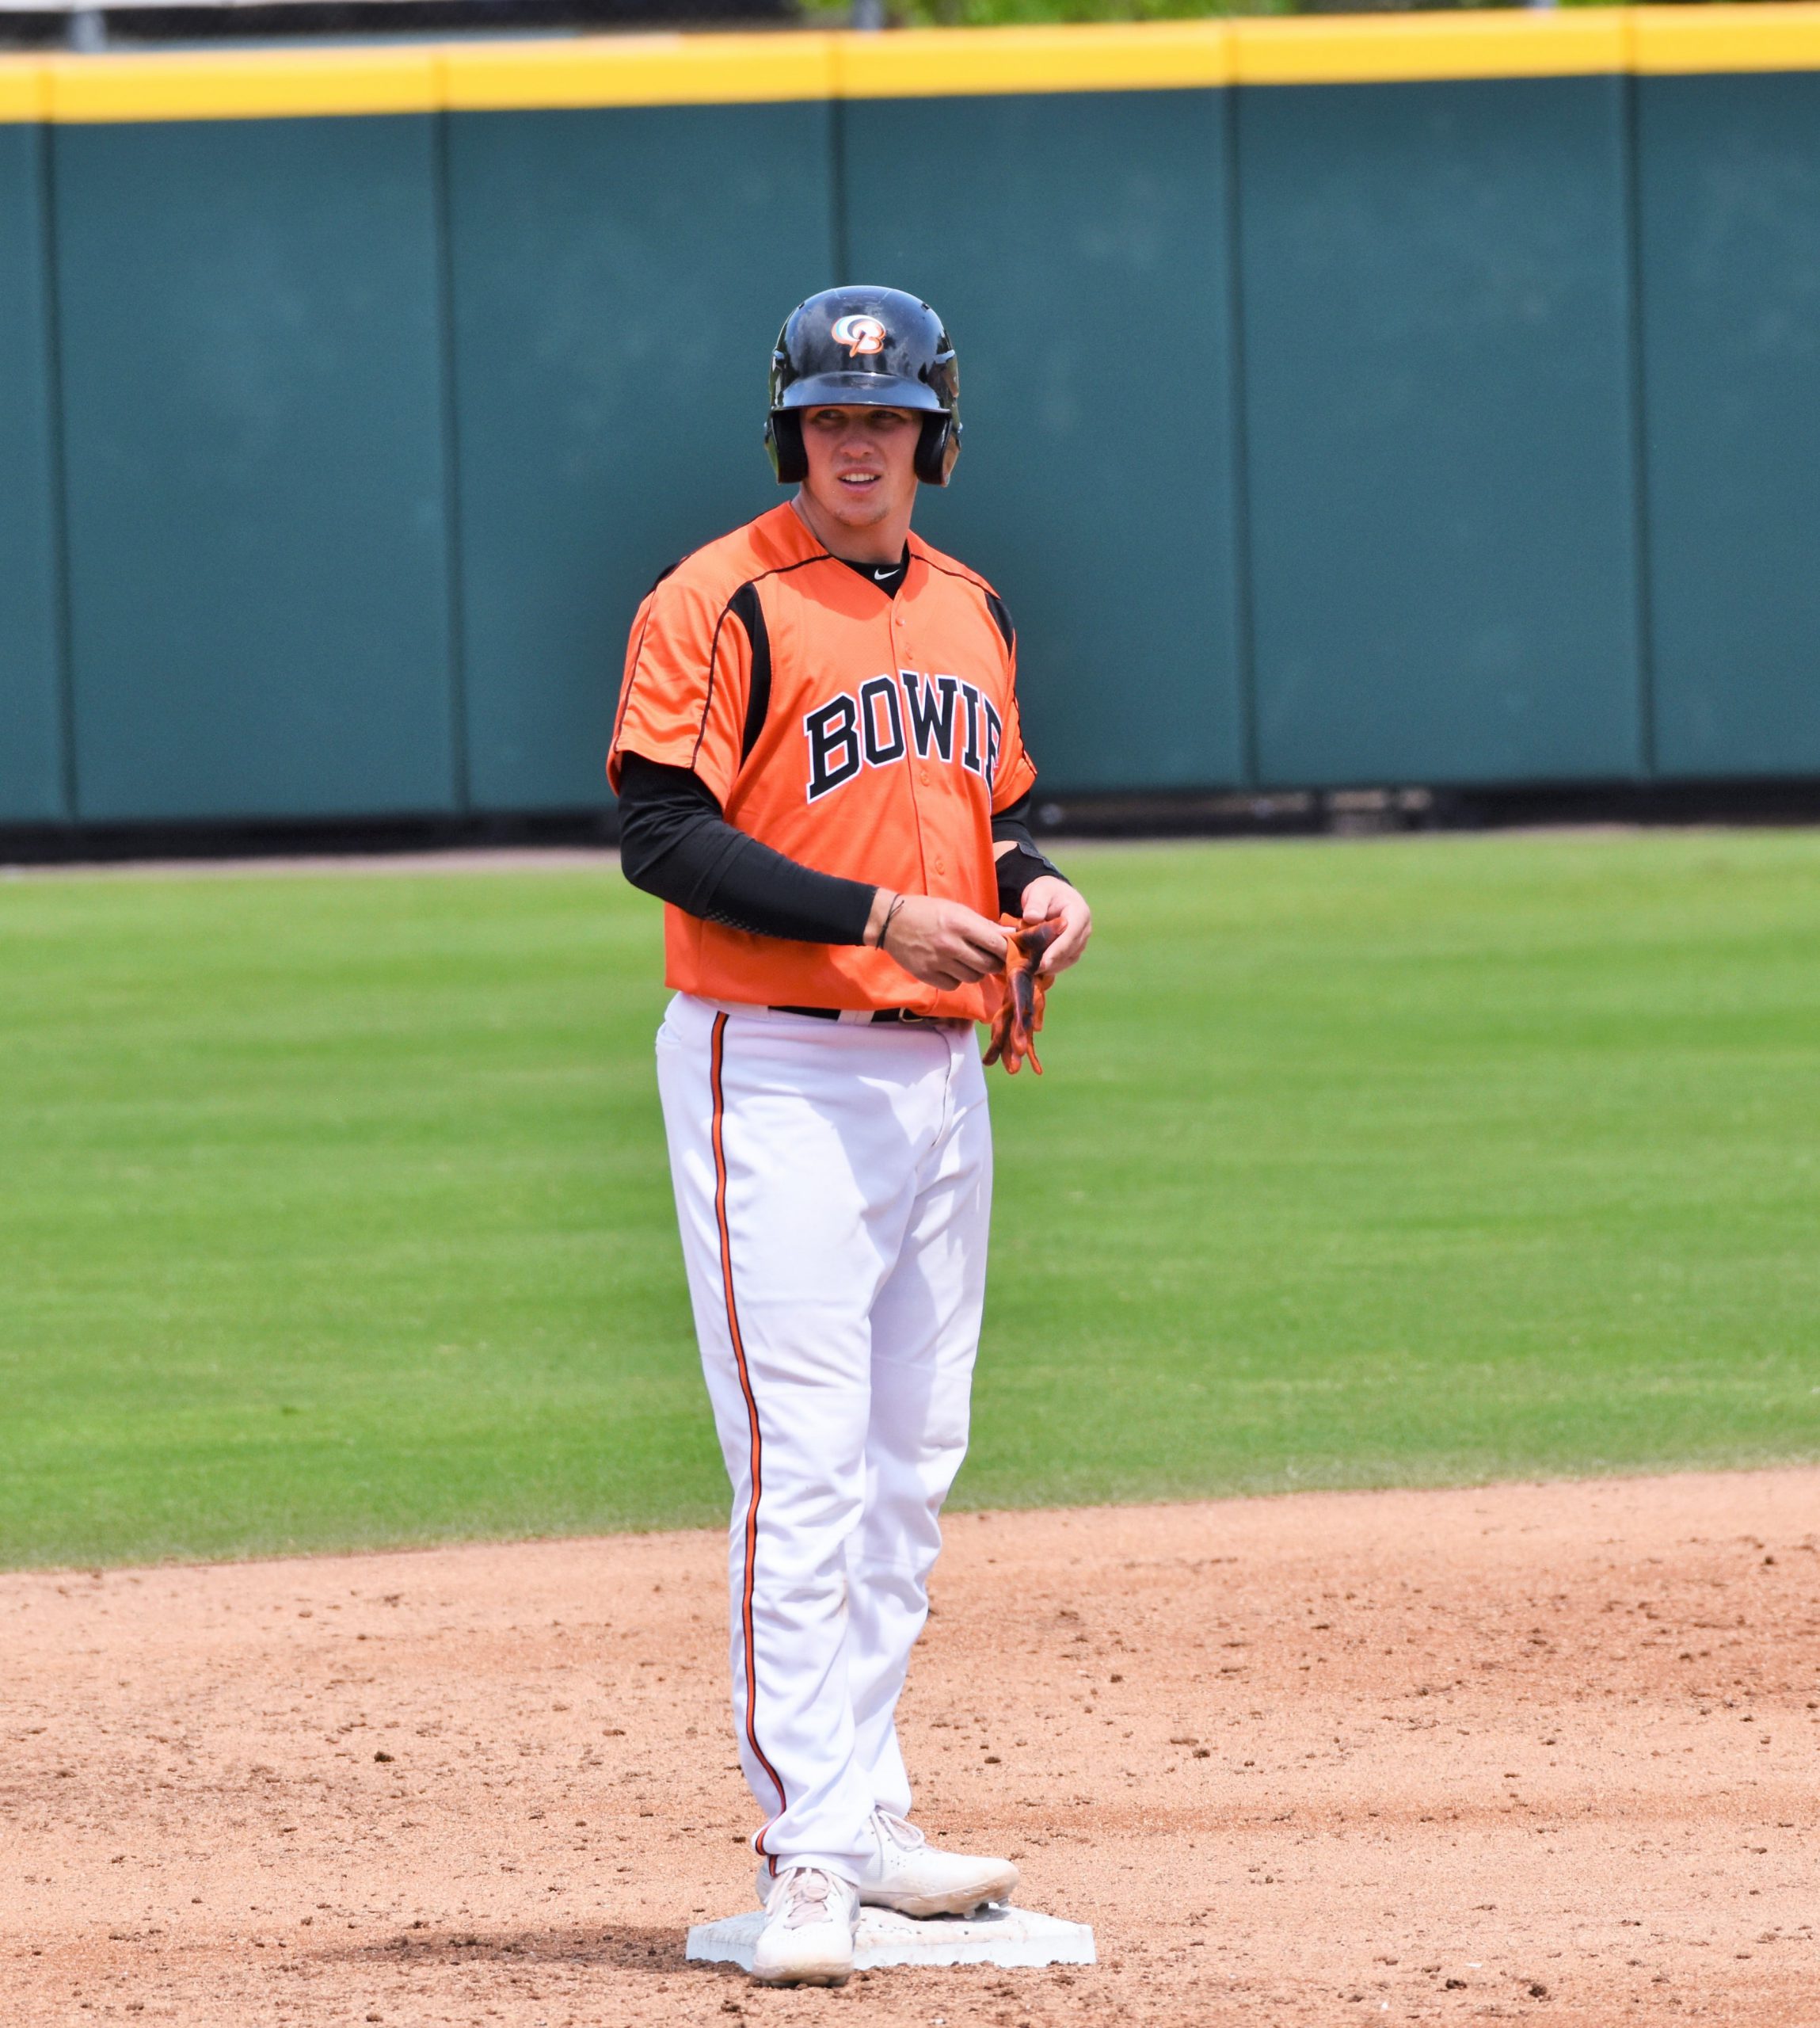 Orioles' top prospect, Adley Rutschman, is still at Double-A. Why?